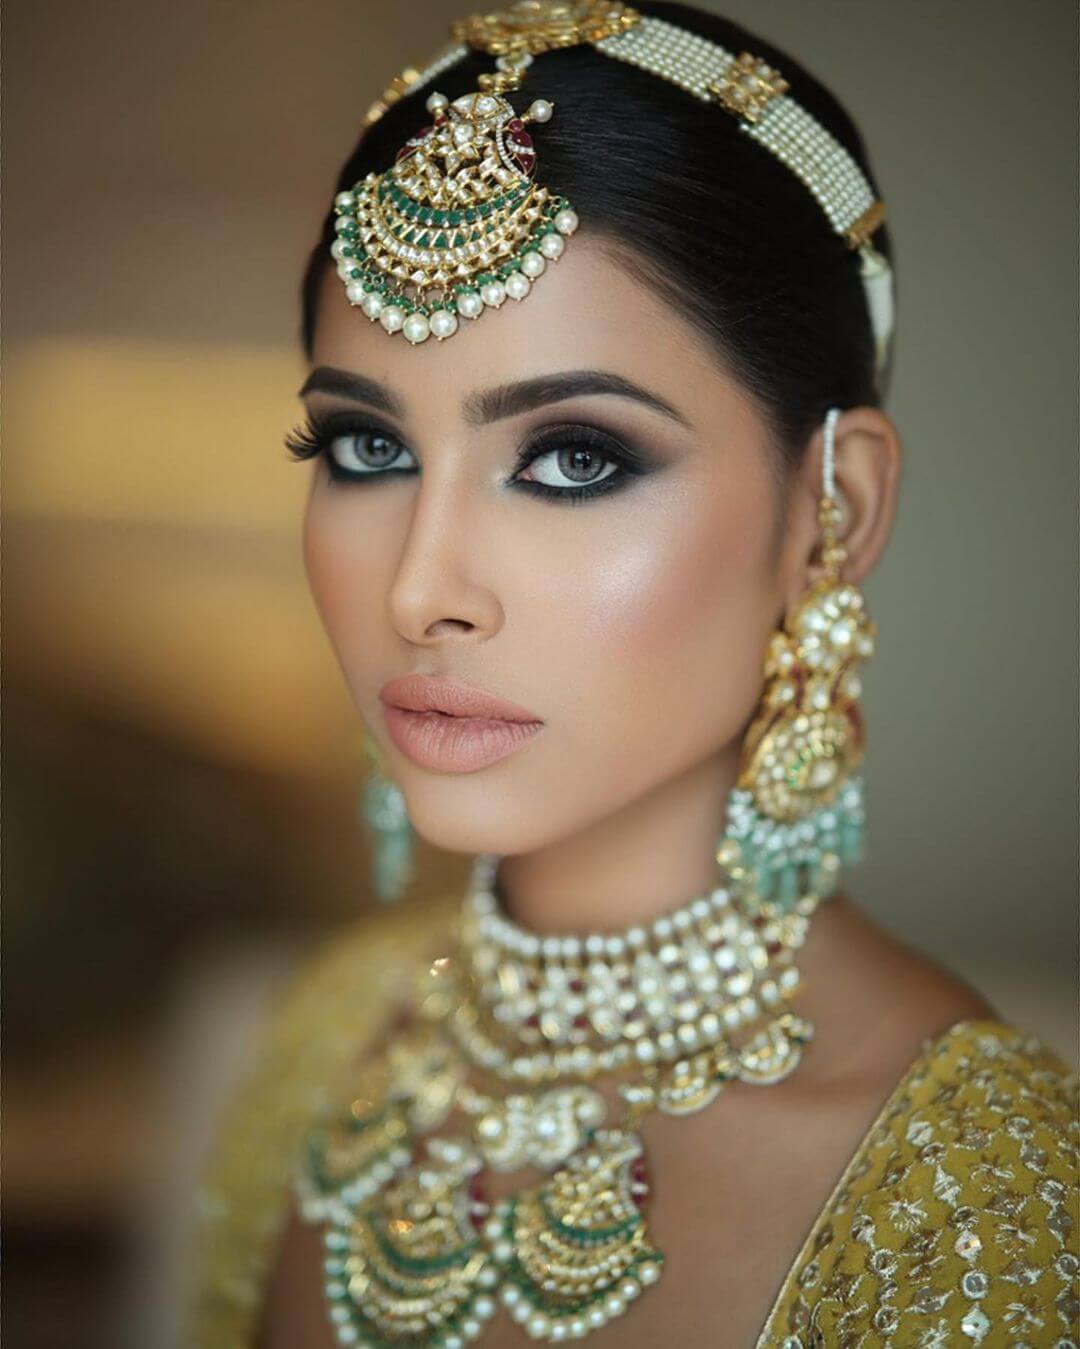 A Statement Smokey Eye Look With Nude Lips To Serve The Ultimate Glamorous Bridal Makeup Look